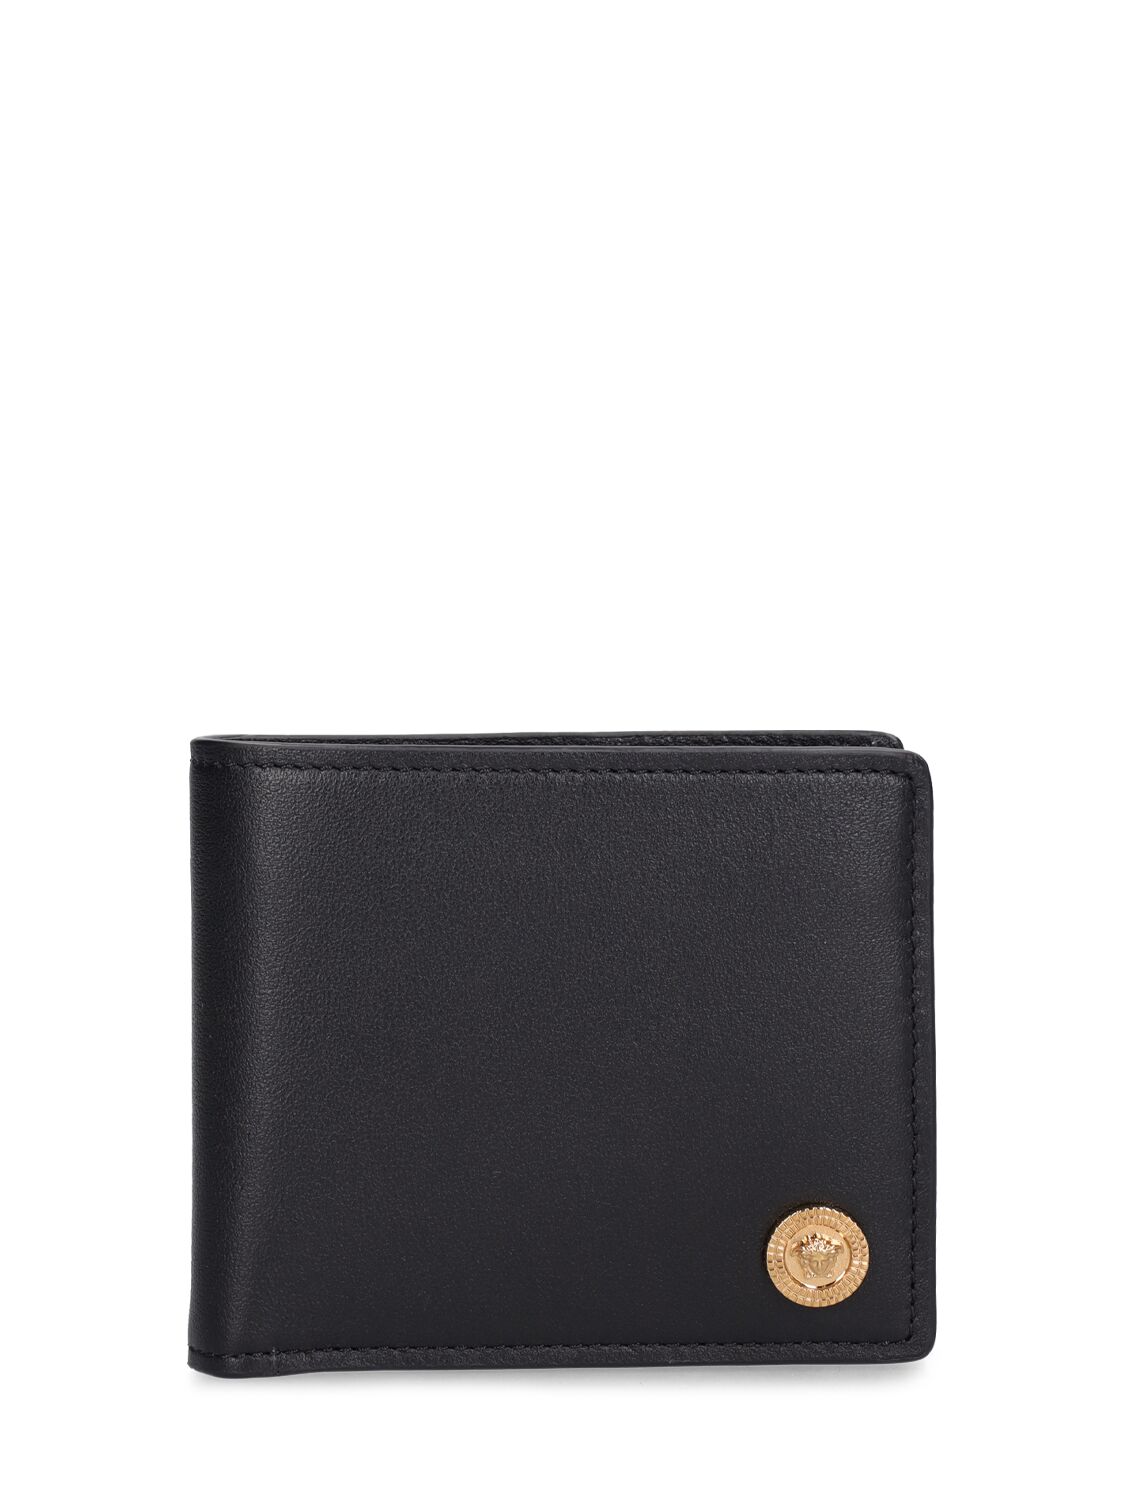 Versace Leather Coin Pocket Wallet In Black,gold